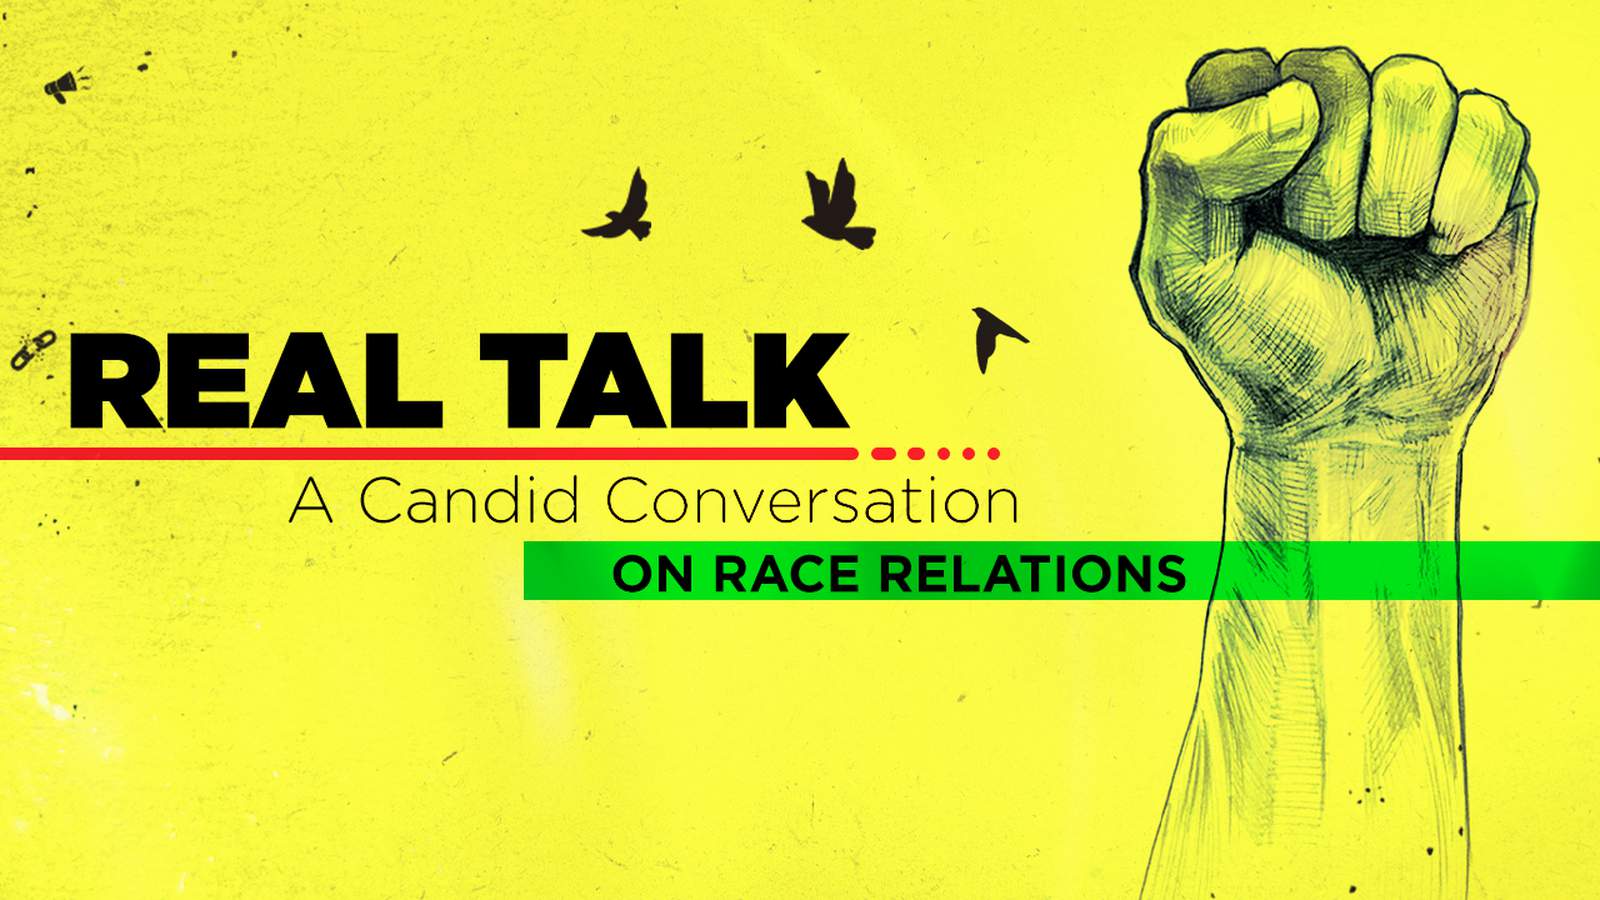 REWATCH: News 6 hosts Real Talk: A Candid Conversation on racial inequality in America